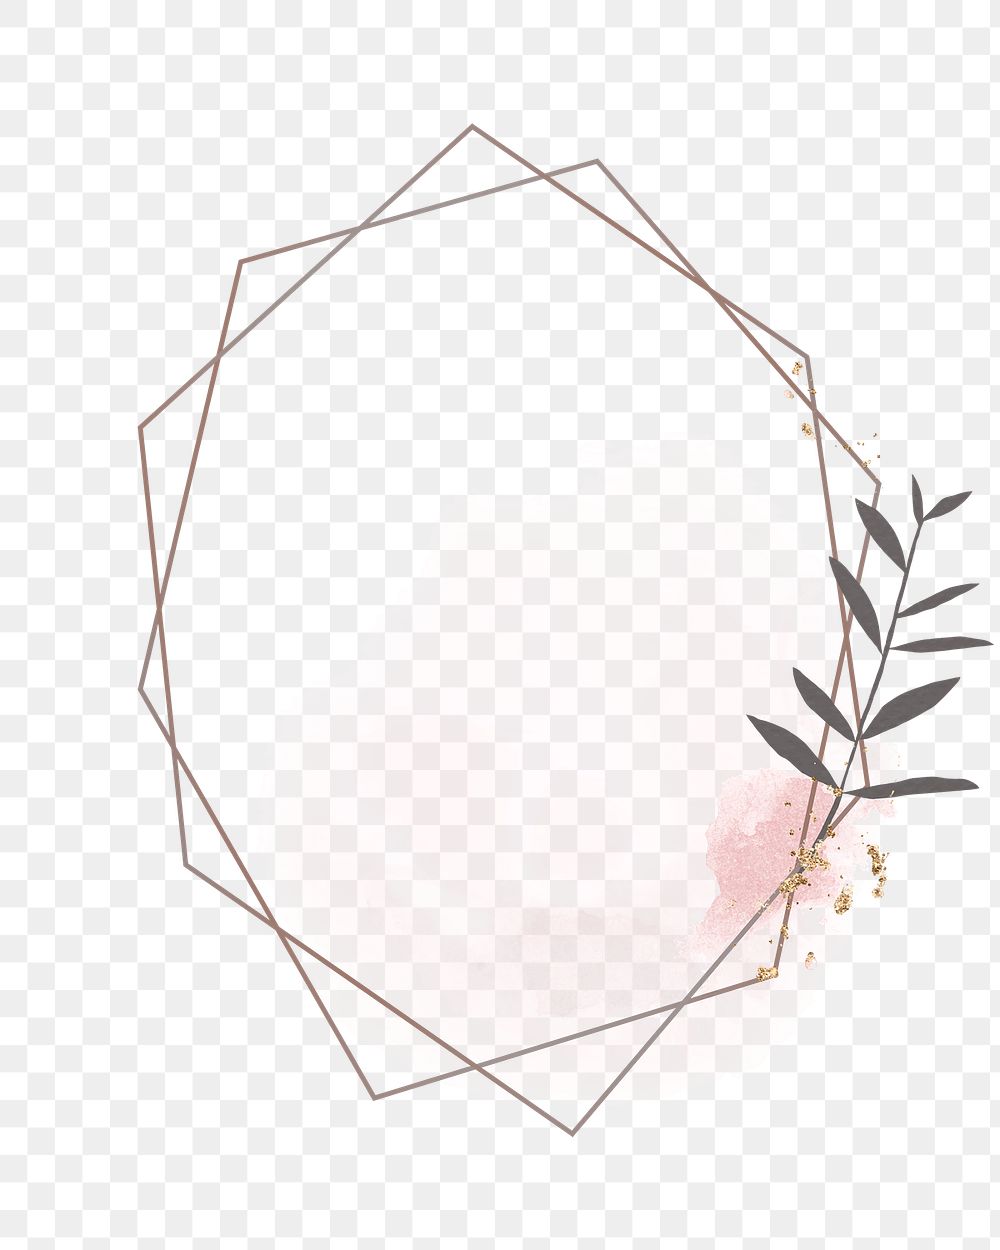 Pink geometric frame png sticker, aesthetic pastel sparkly design